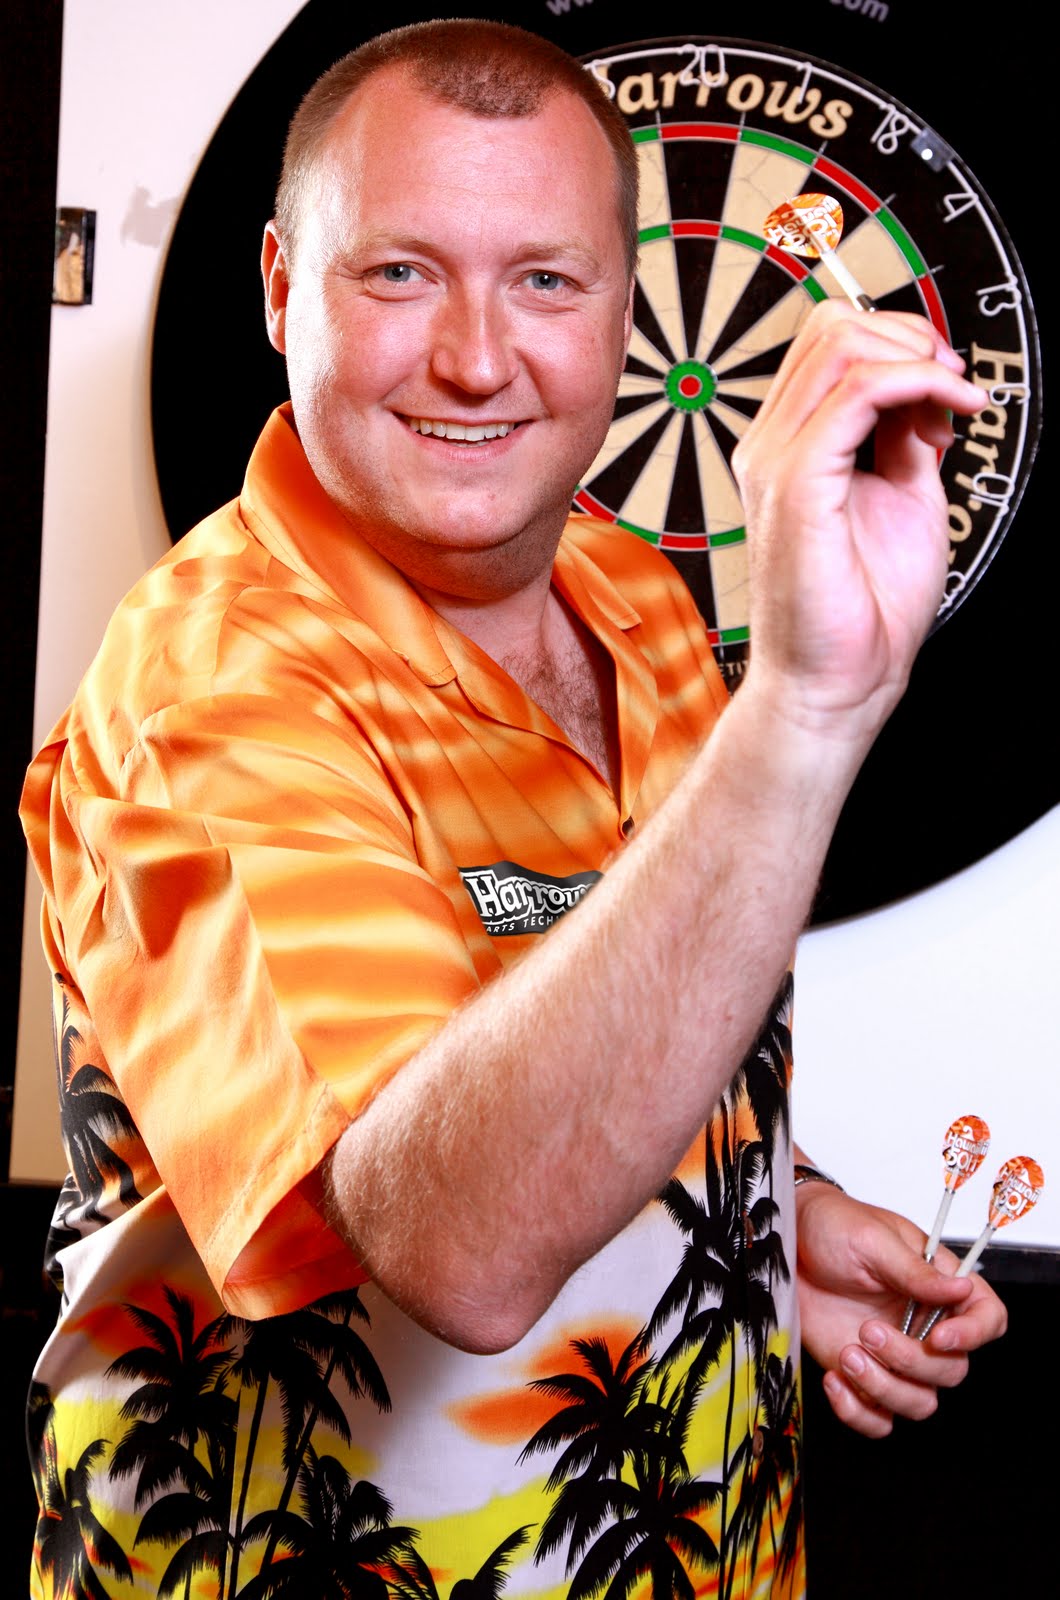 Madness House of Fun Weekender: Wayne Mardle challenges YOU to a game ...